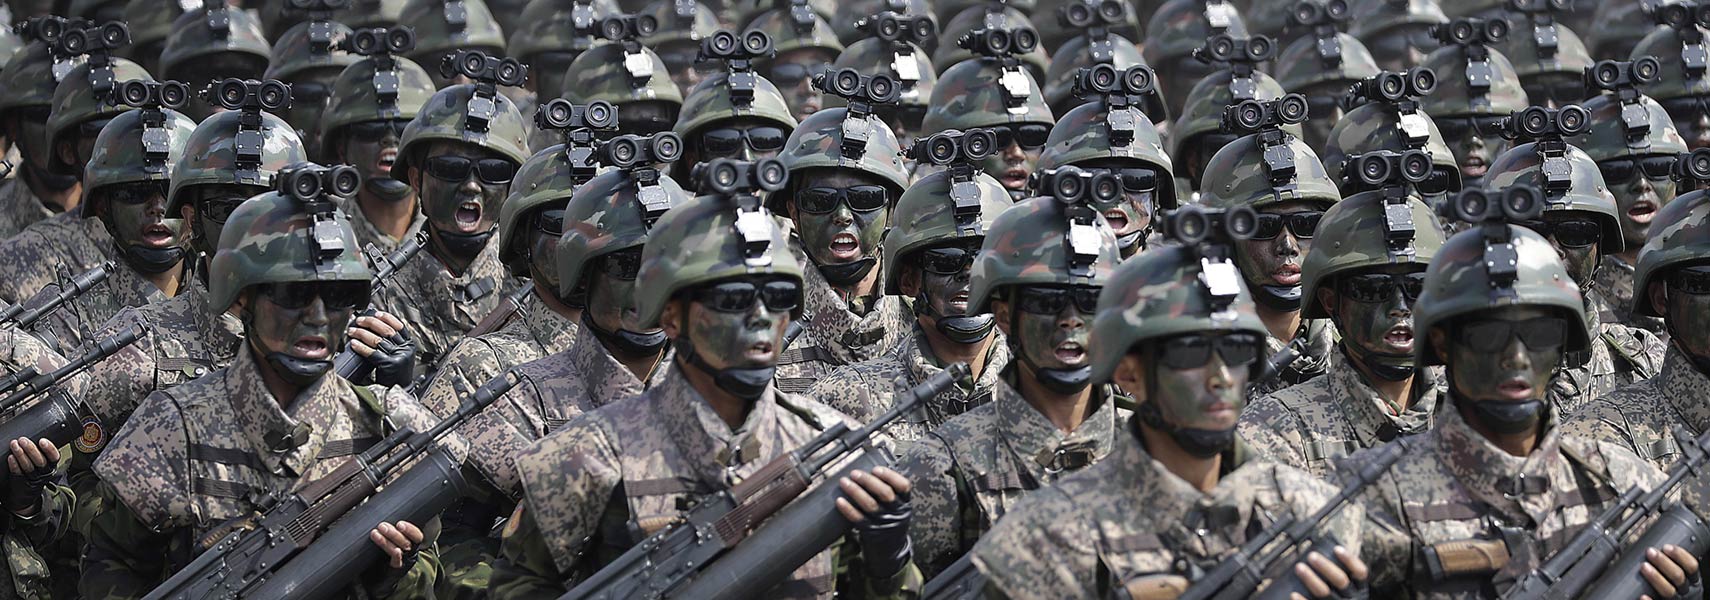 North Korean Special Operations Forces march across the Kim Il Sung Square